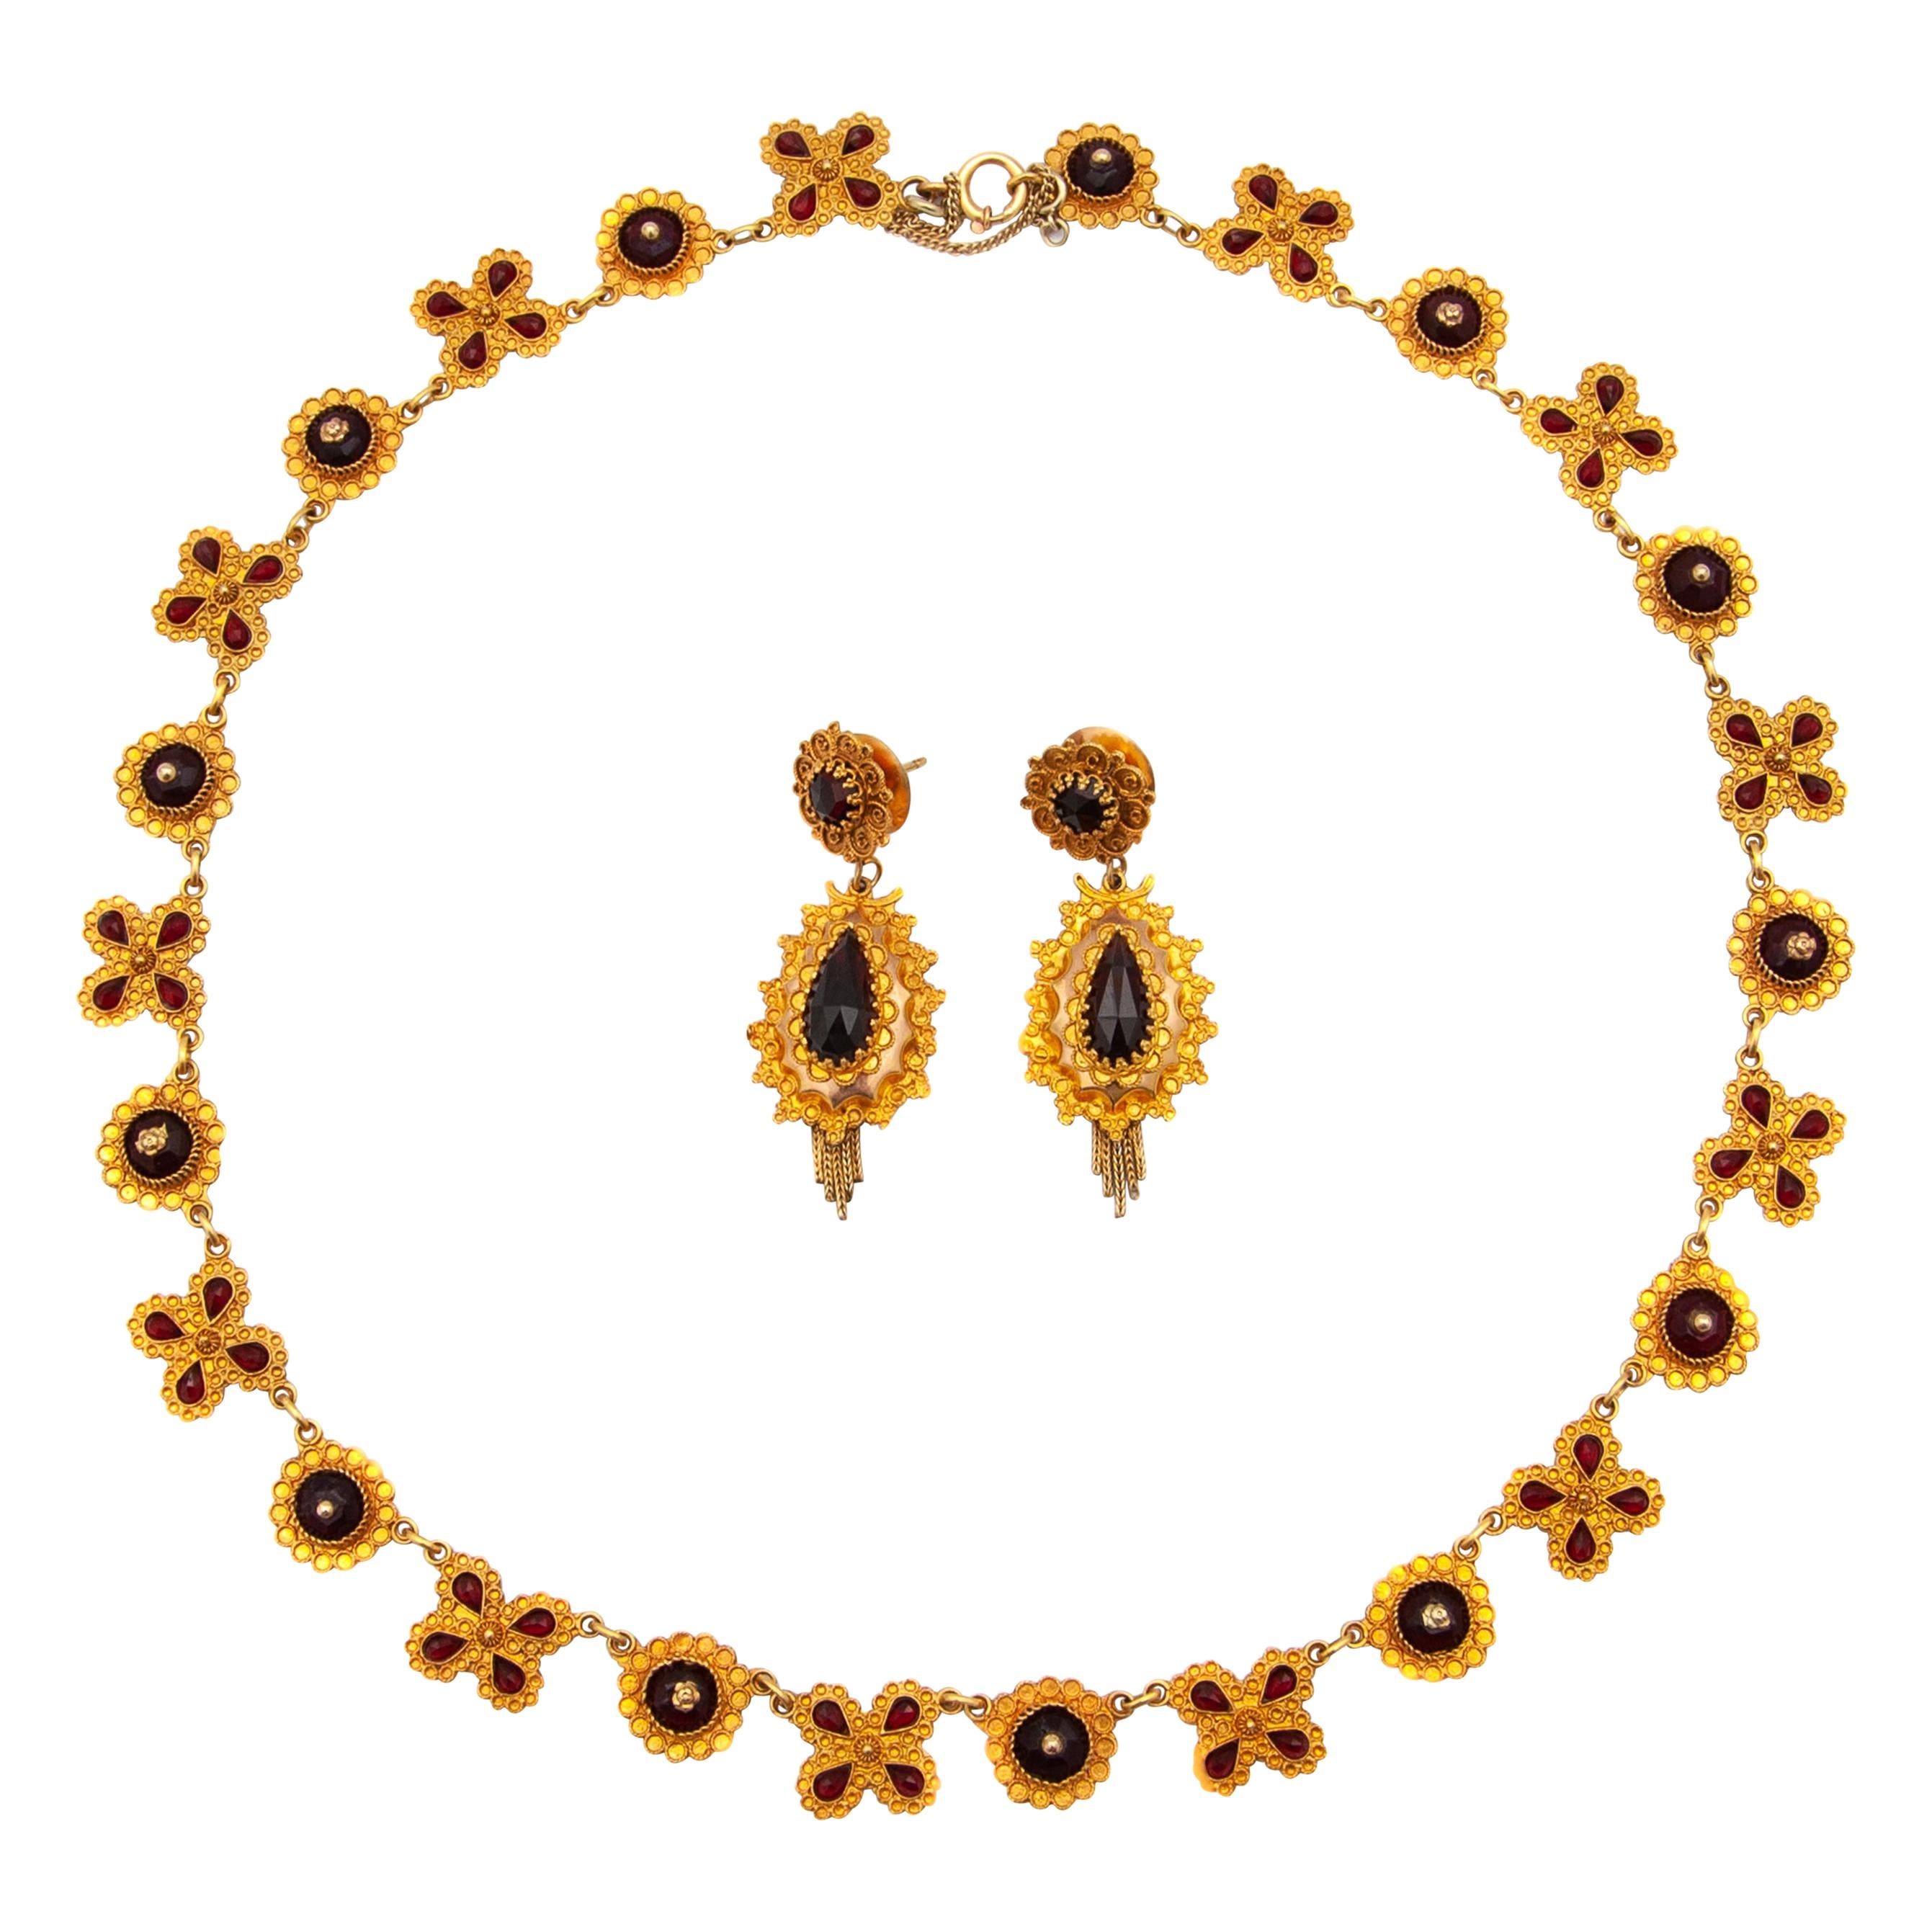 Garnet 14K Yellow Gold Dangle Earrings and Necklace, Jewelry Set